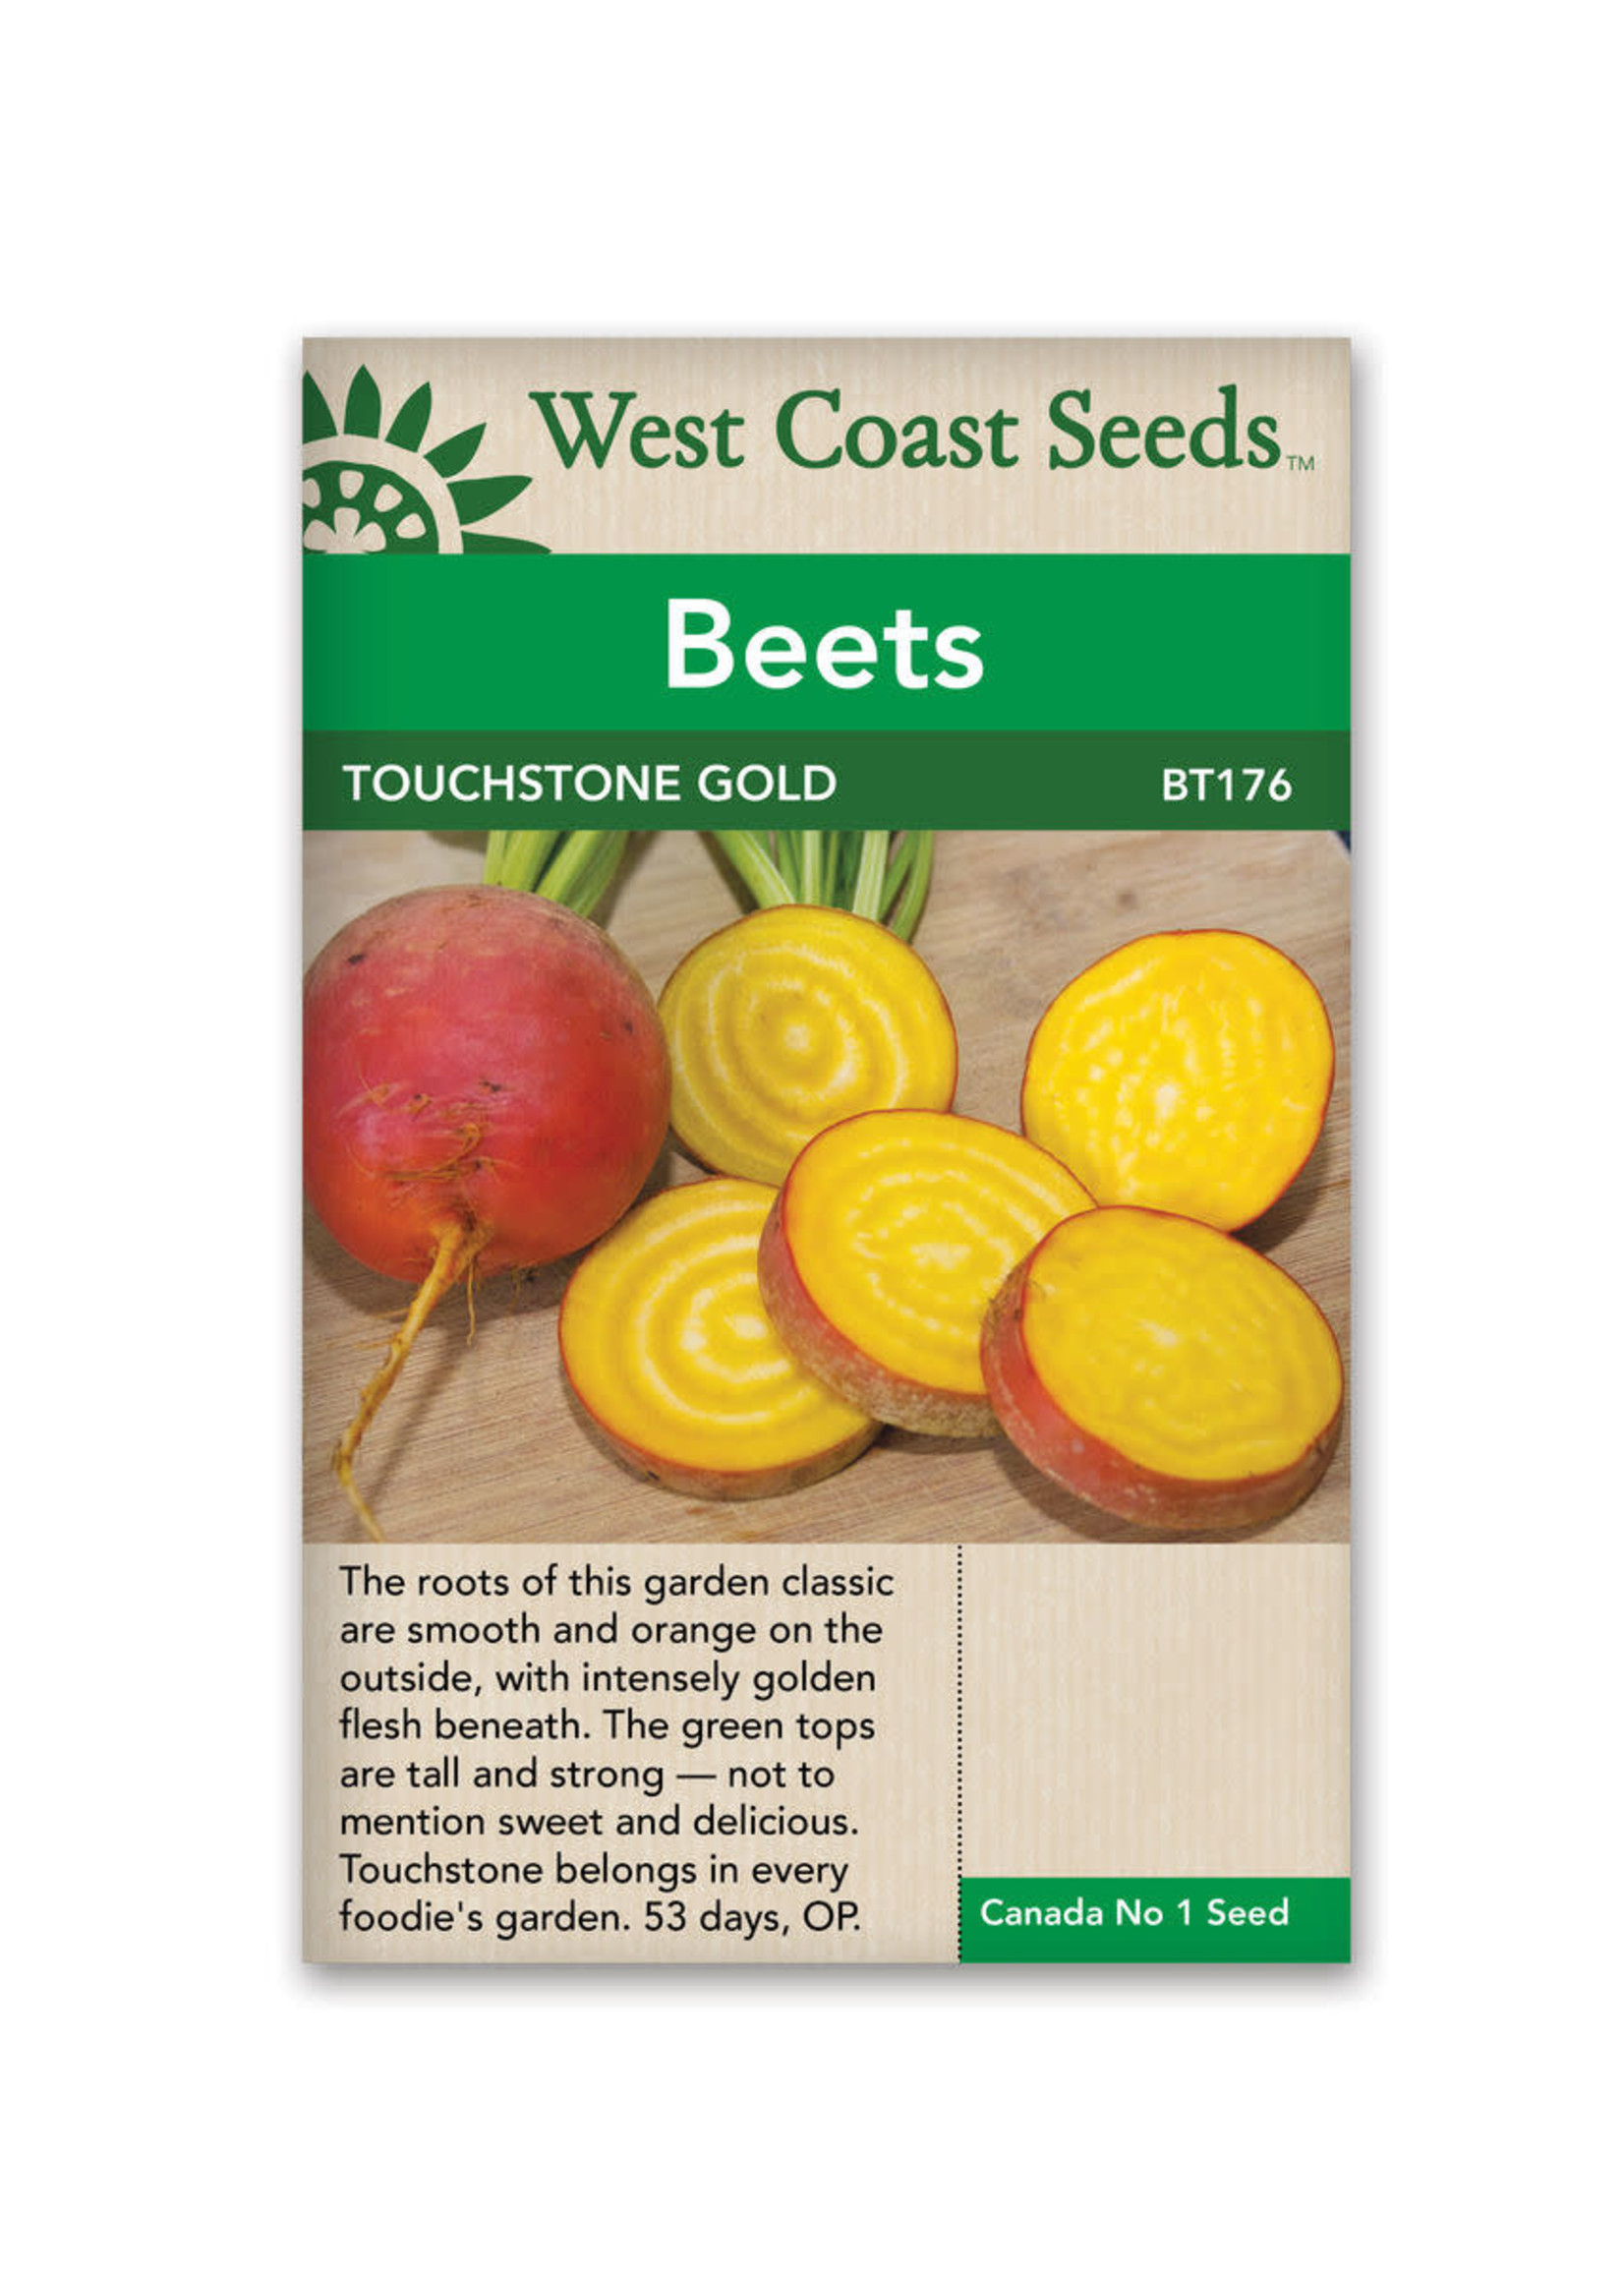 West Coast Seeds Touchstone Gold Beets